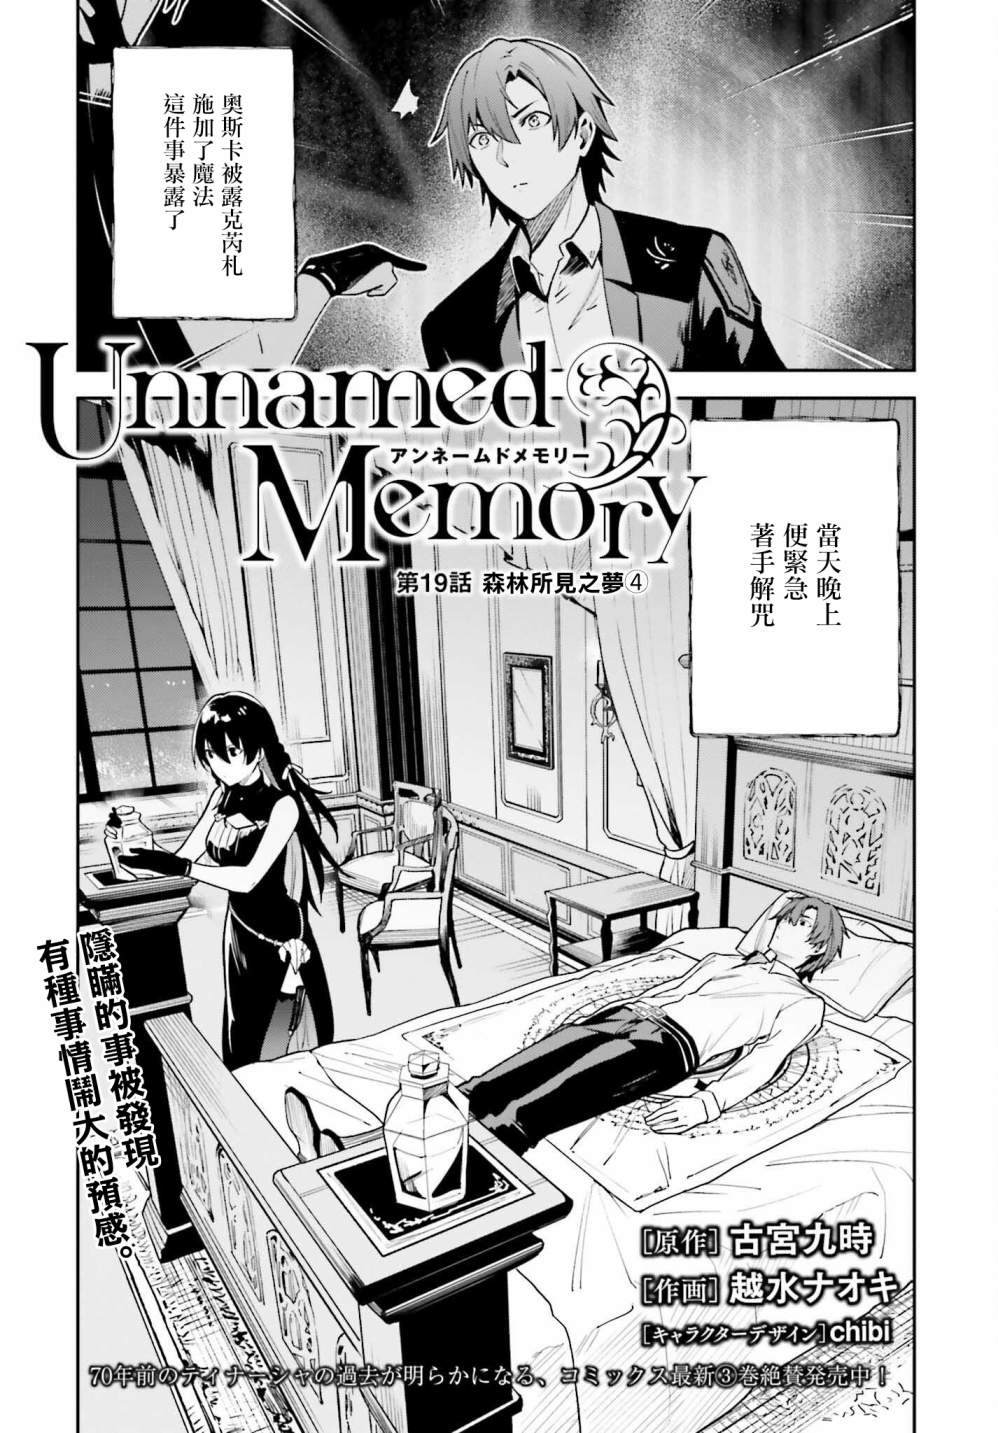 Unnamed Memory - 第19话 - 1